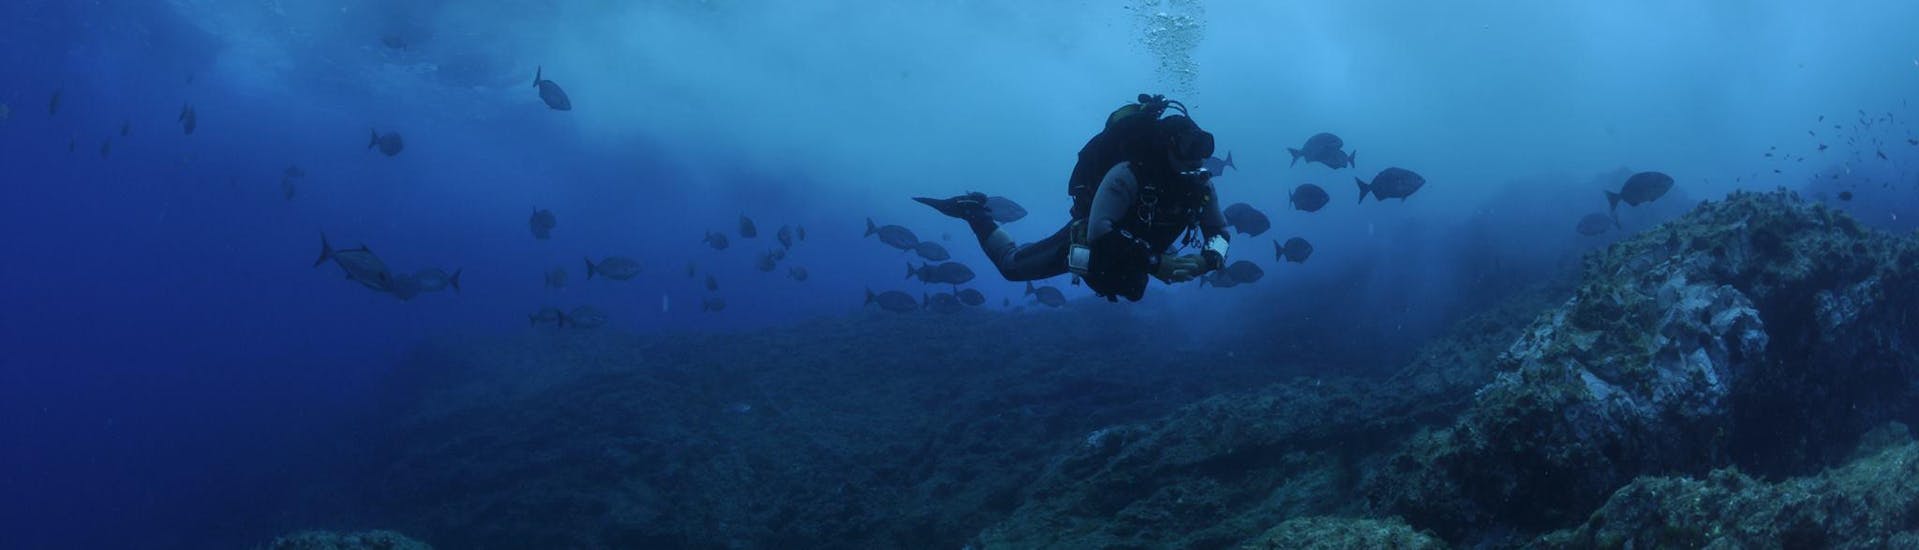 Diver under water during a Guide Boat Dive with a school of fish with Haliotis Santa Maria.